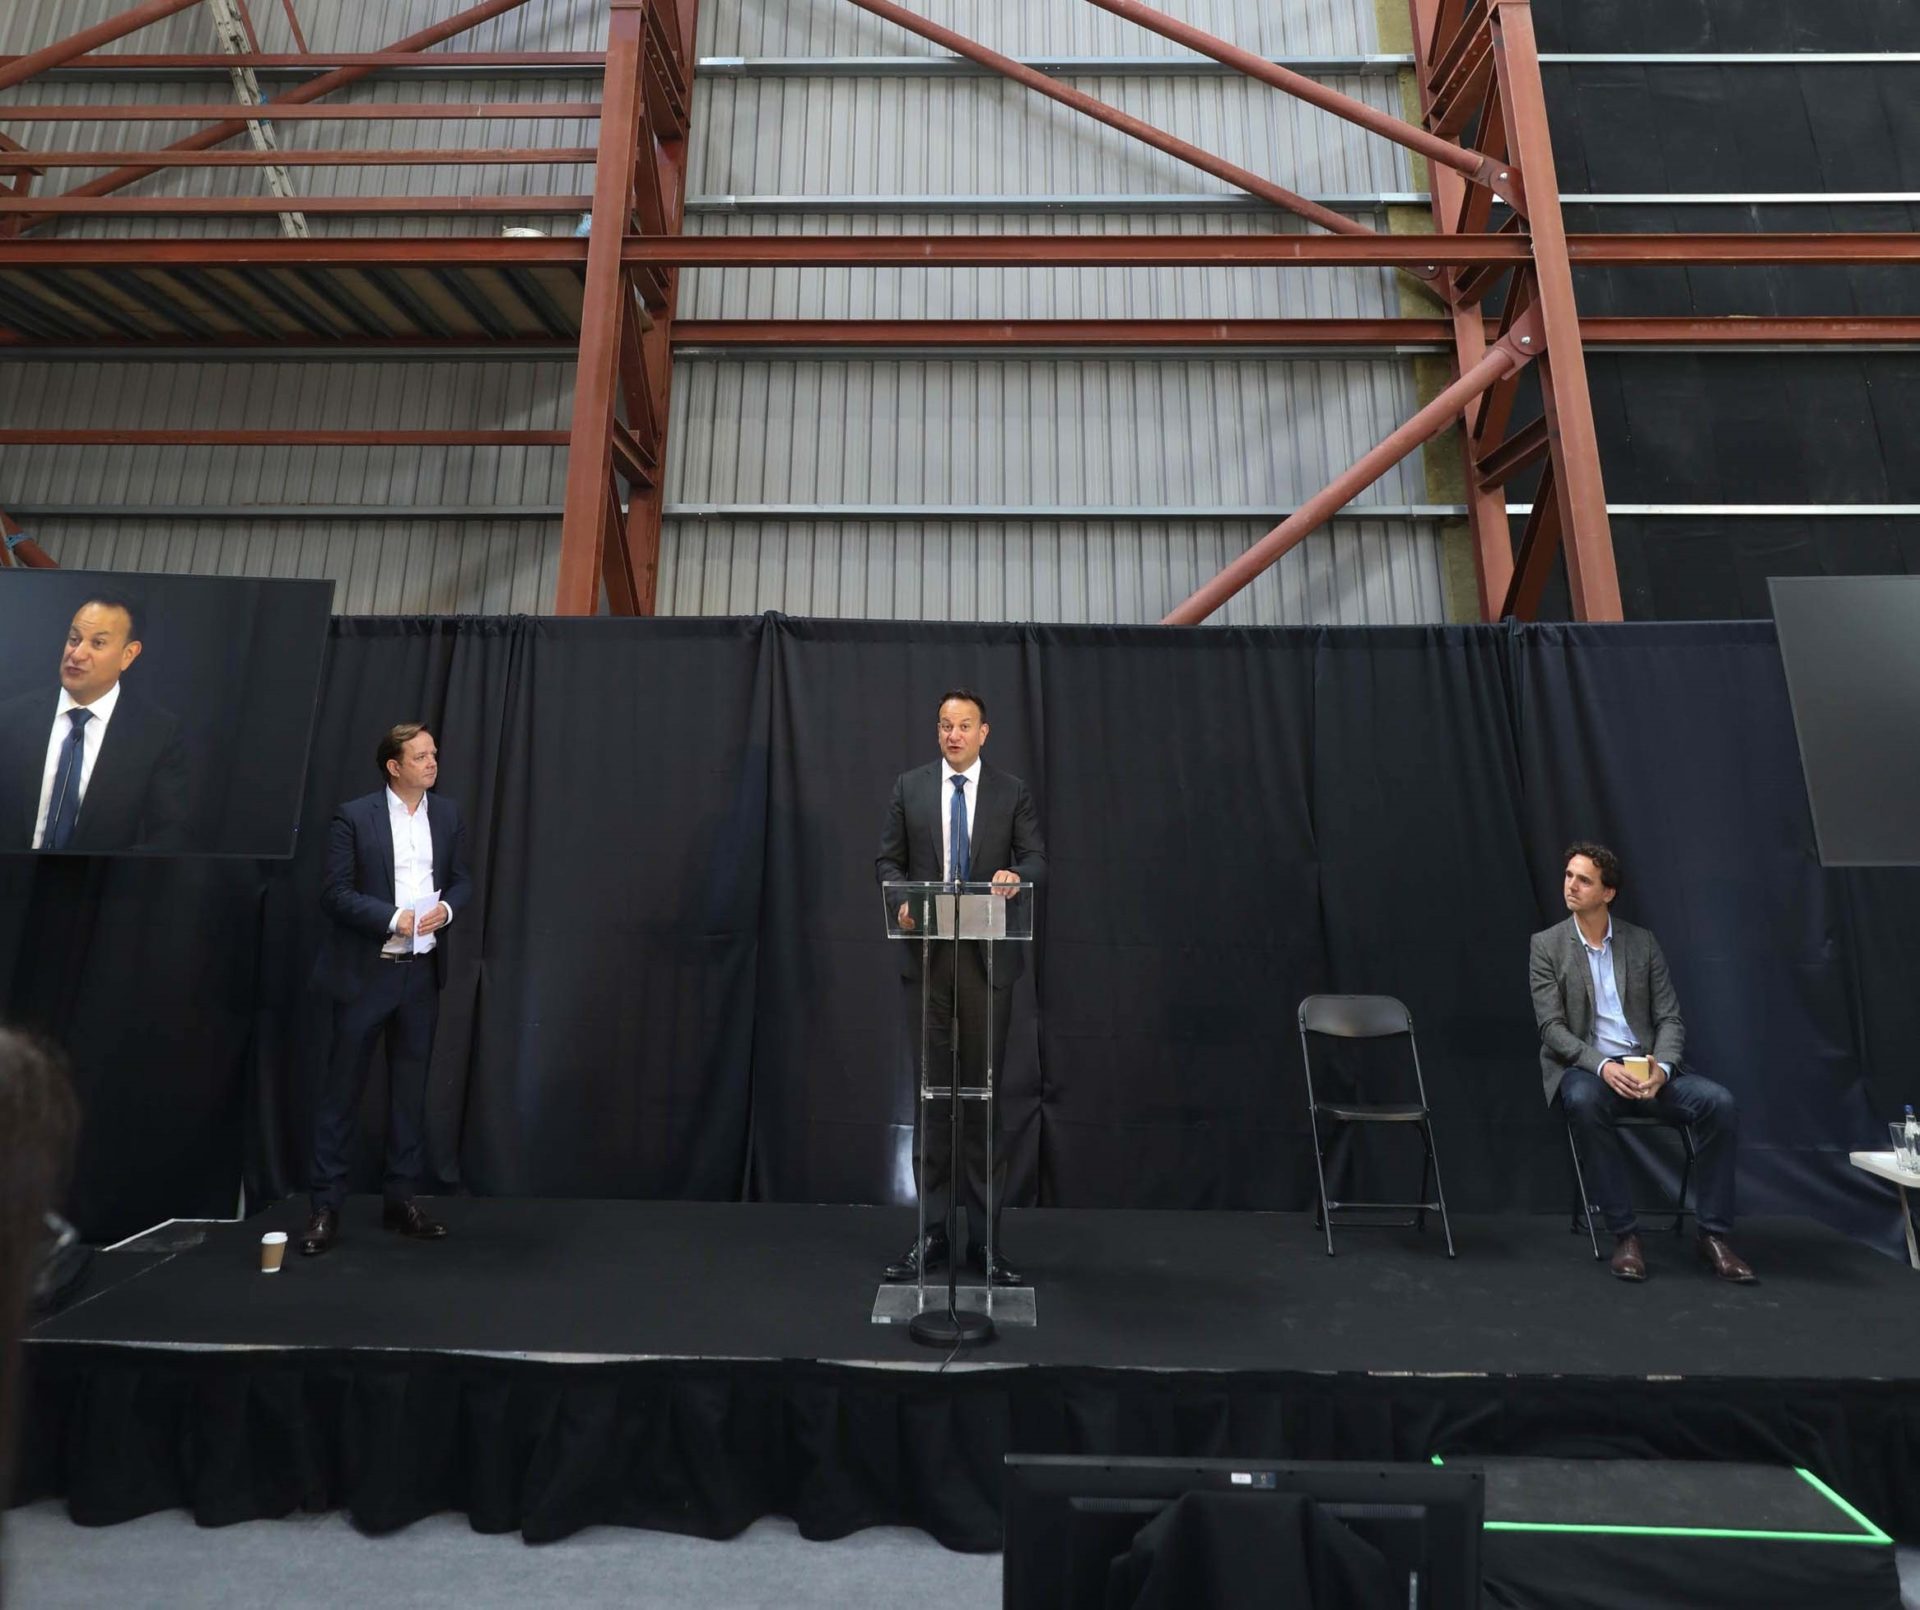 Taoiseach Leo Varadkar (centre) speaking at Ashford Studios in Co Wicklow as Fox Entertainment announced investment of more than €30 million into the Irish audio-visual sector